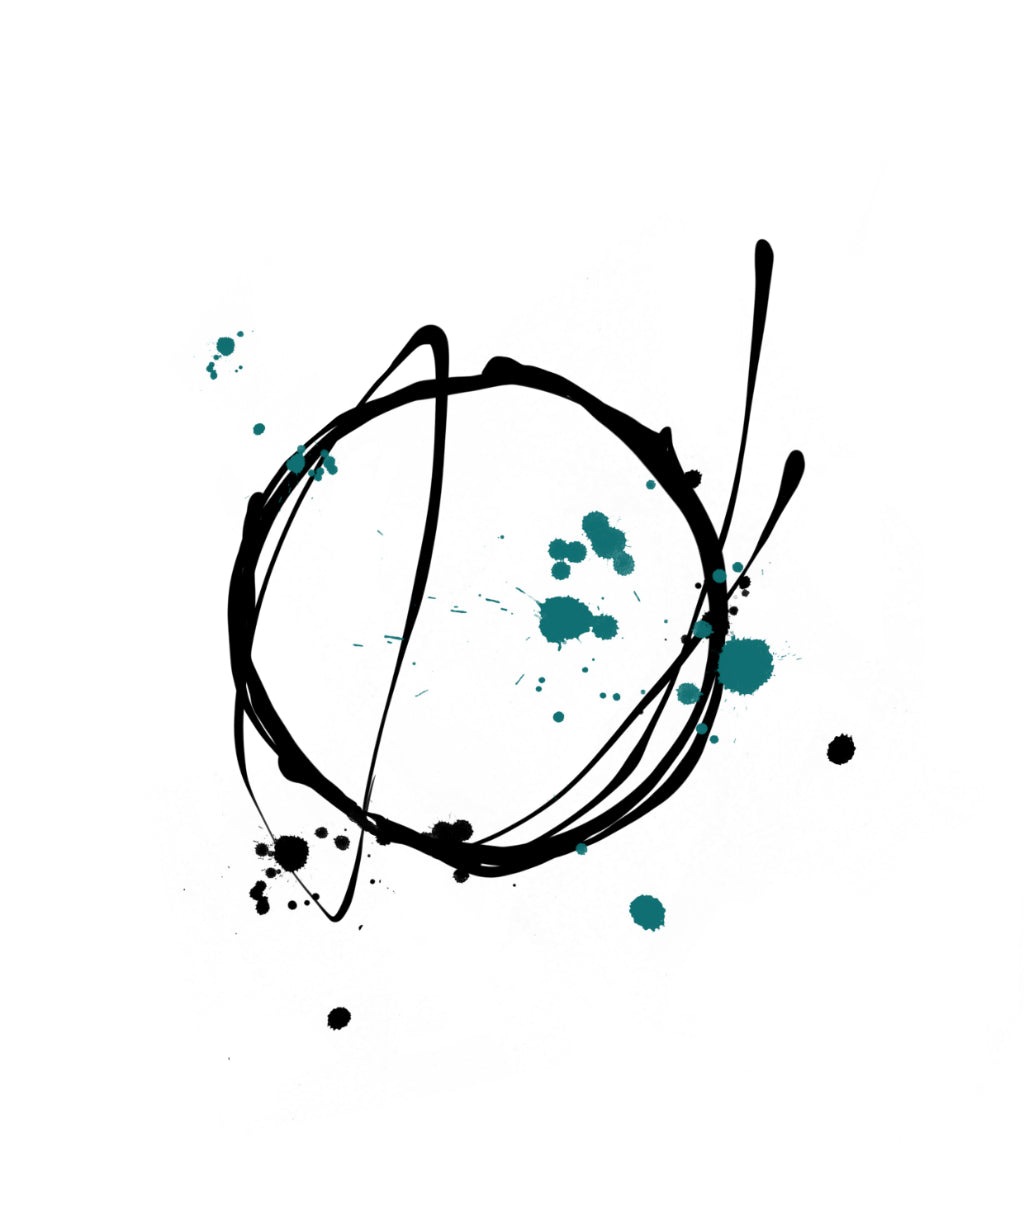 White canvas with simple black circle and splash of blue paint 